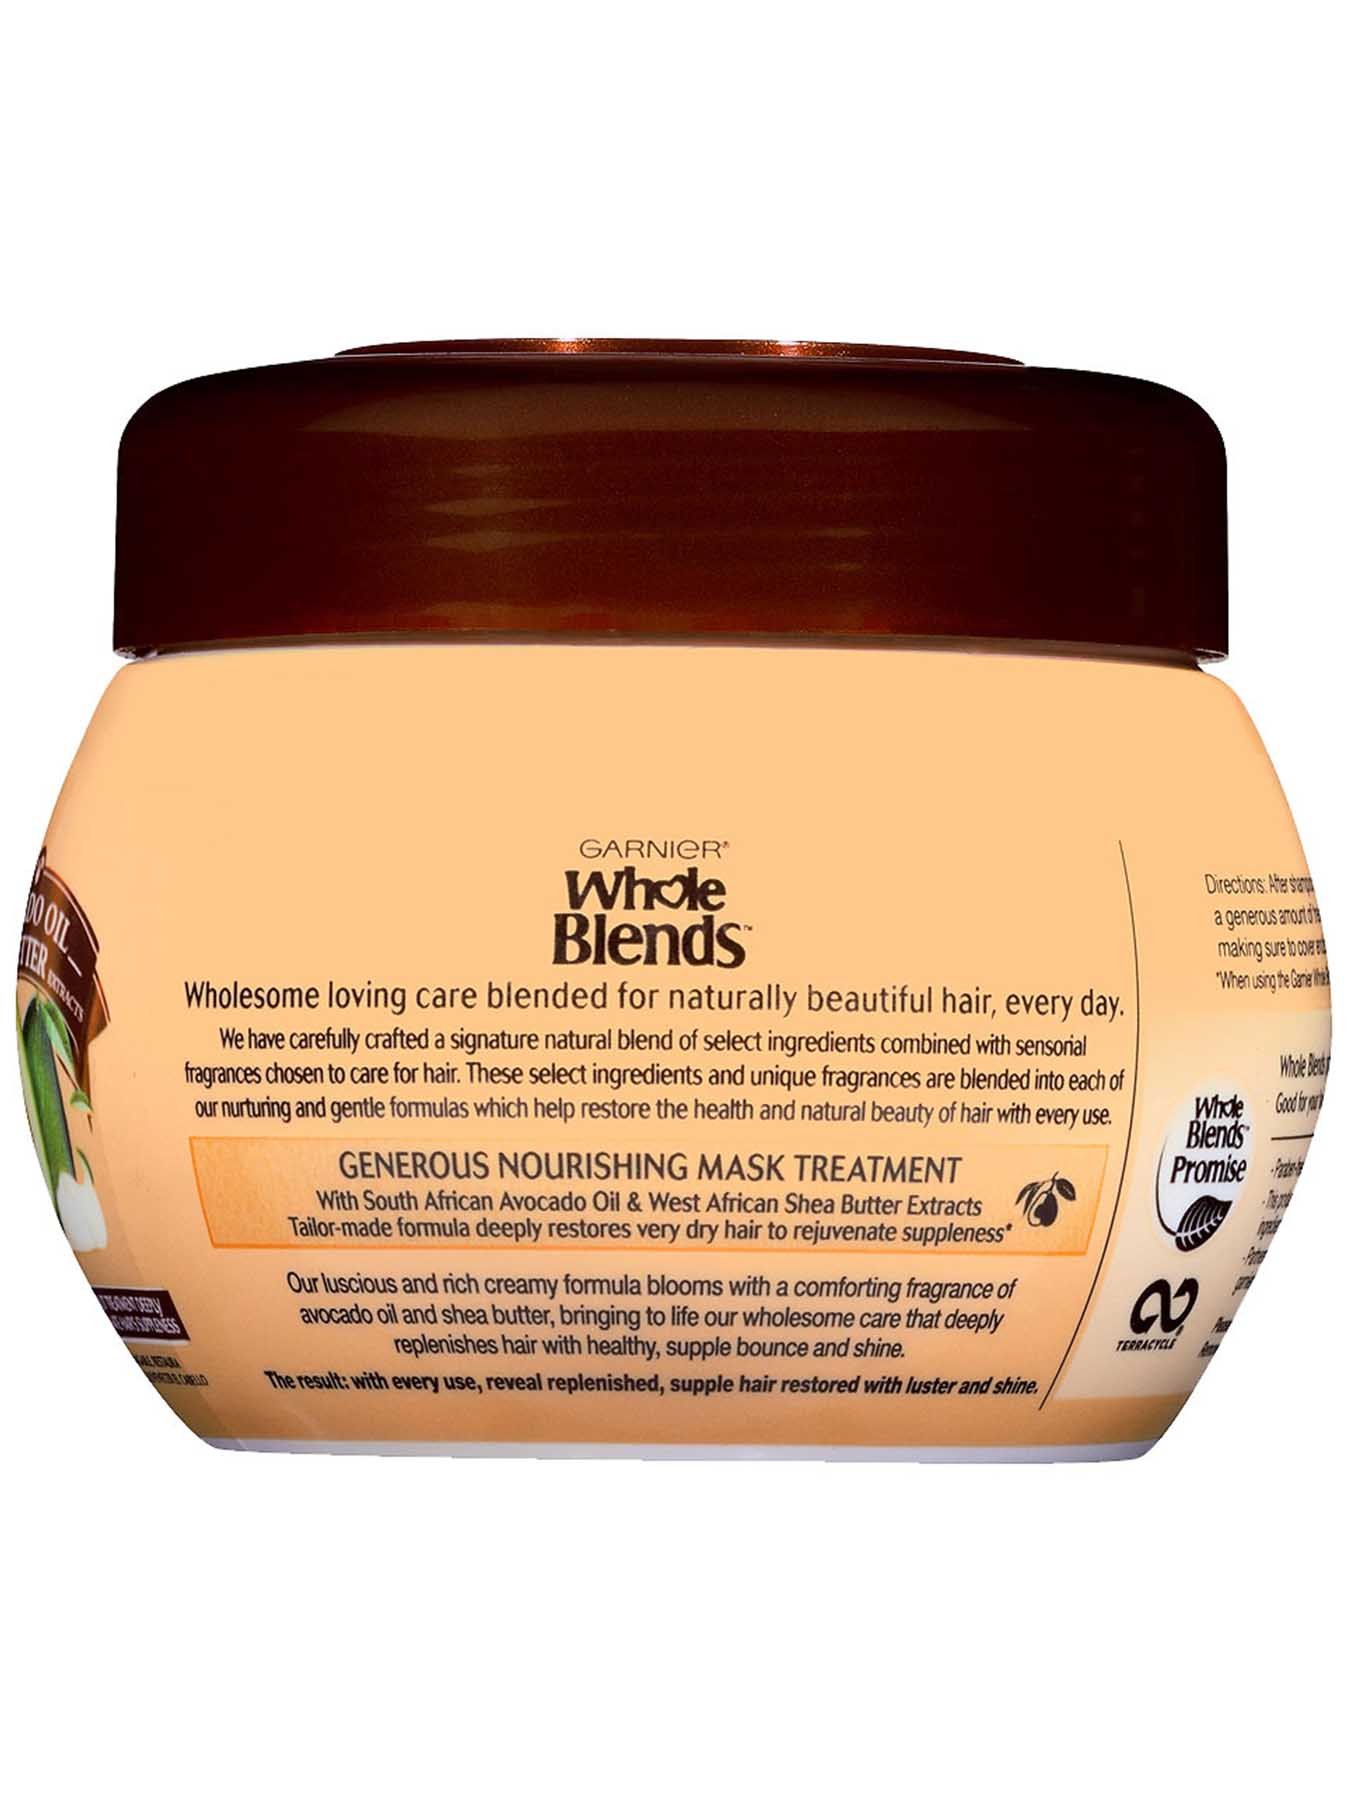 Back view of Nourishing Mask with Avacado Oil and Shea Butter.